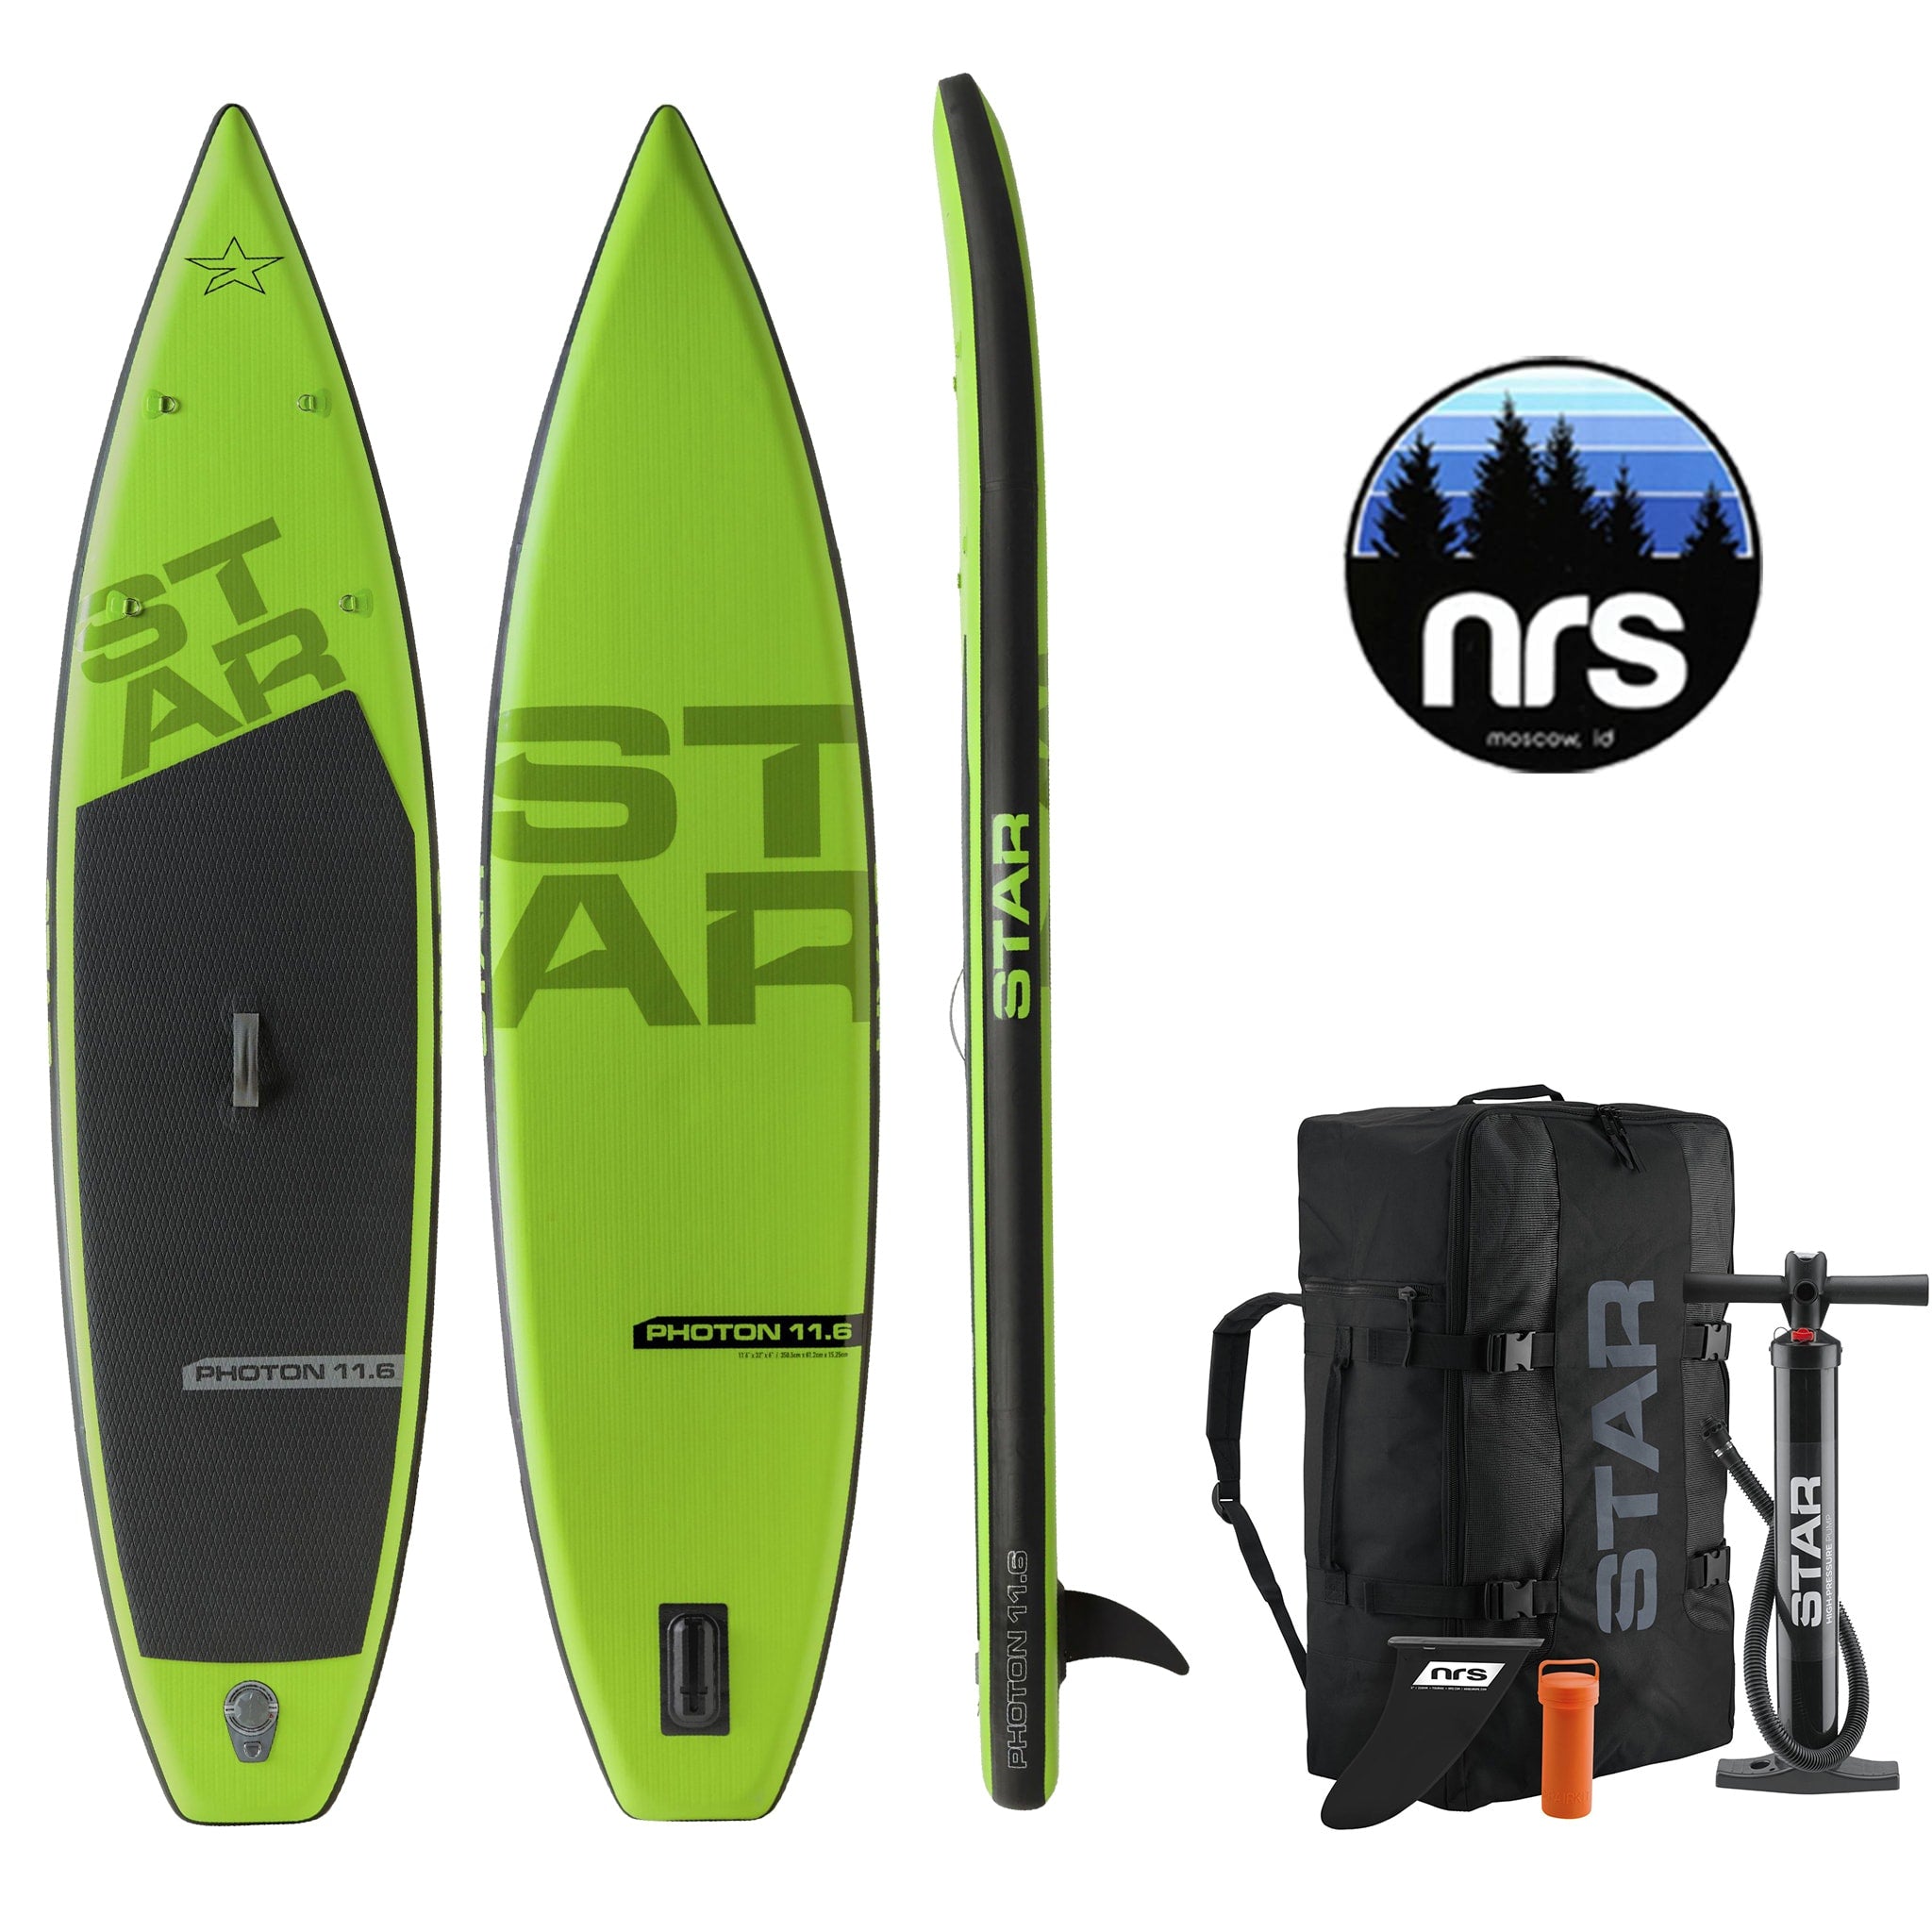 Stand Up Paddle Board (SUP) Paddles For Sale, ISLE